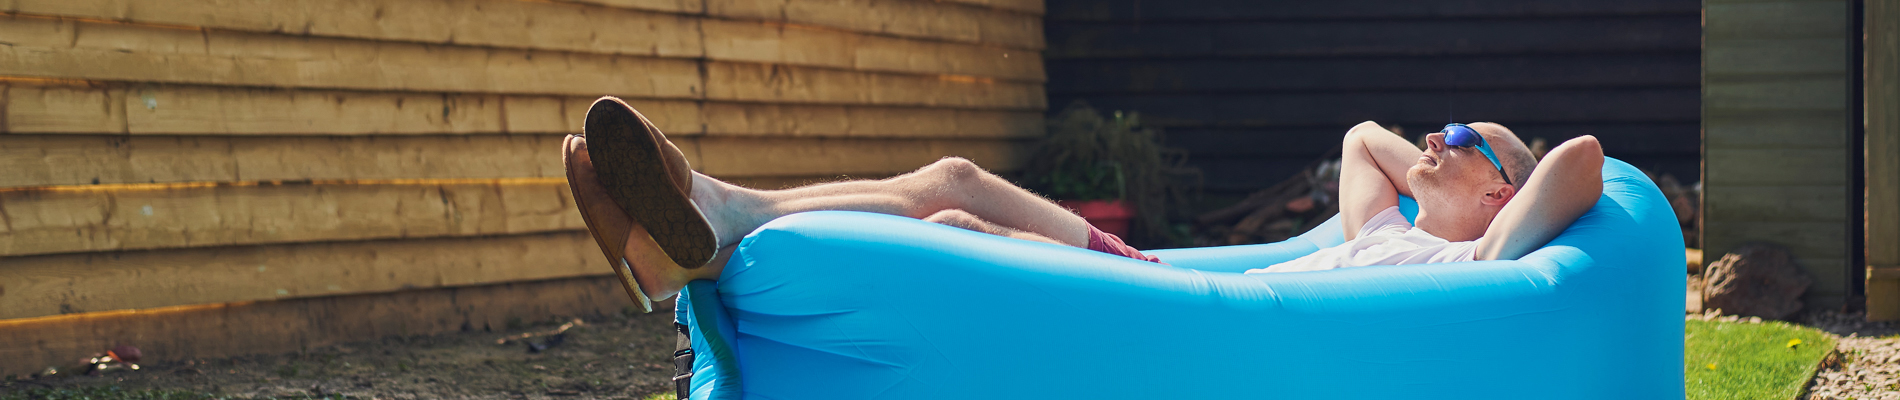 Man laying back in a one person pool enjoying the moment in the sun